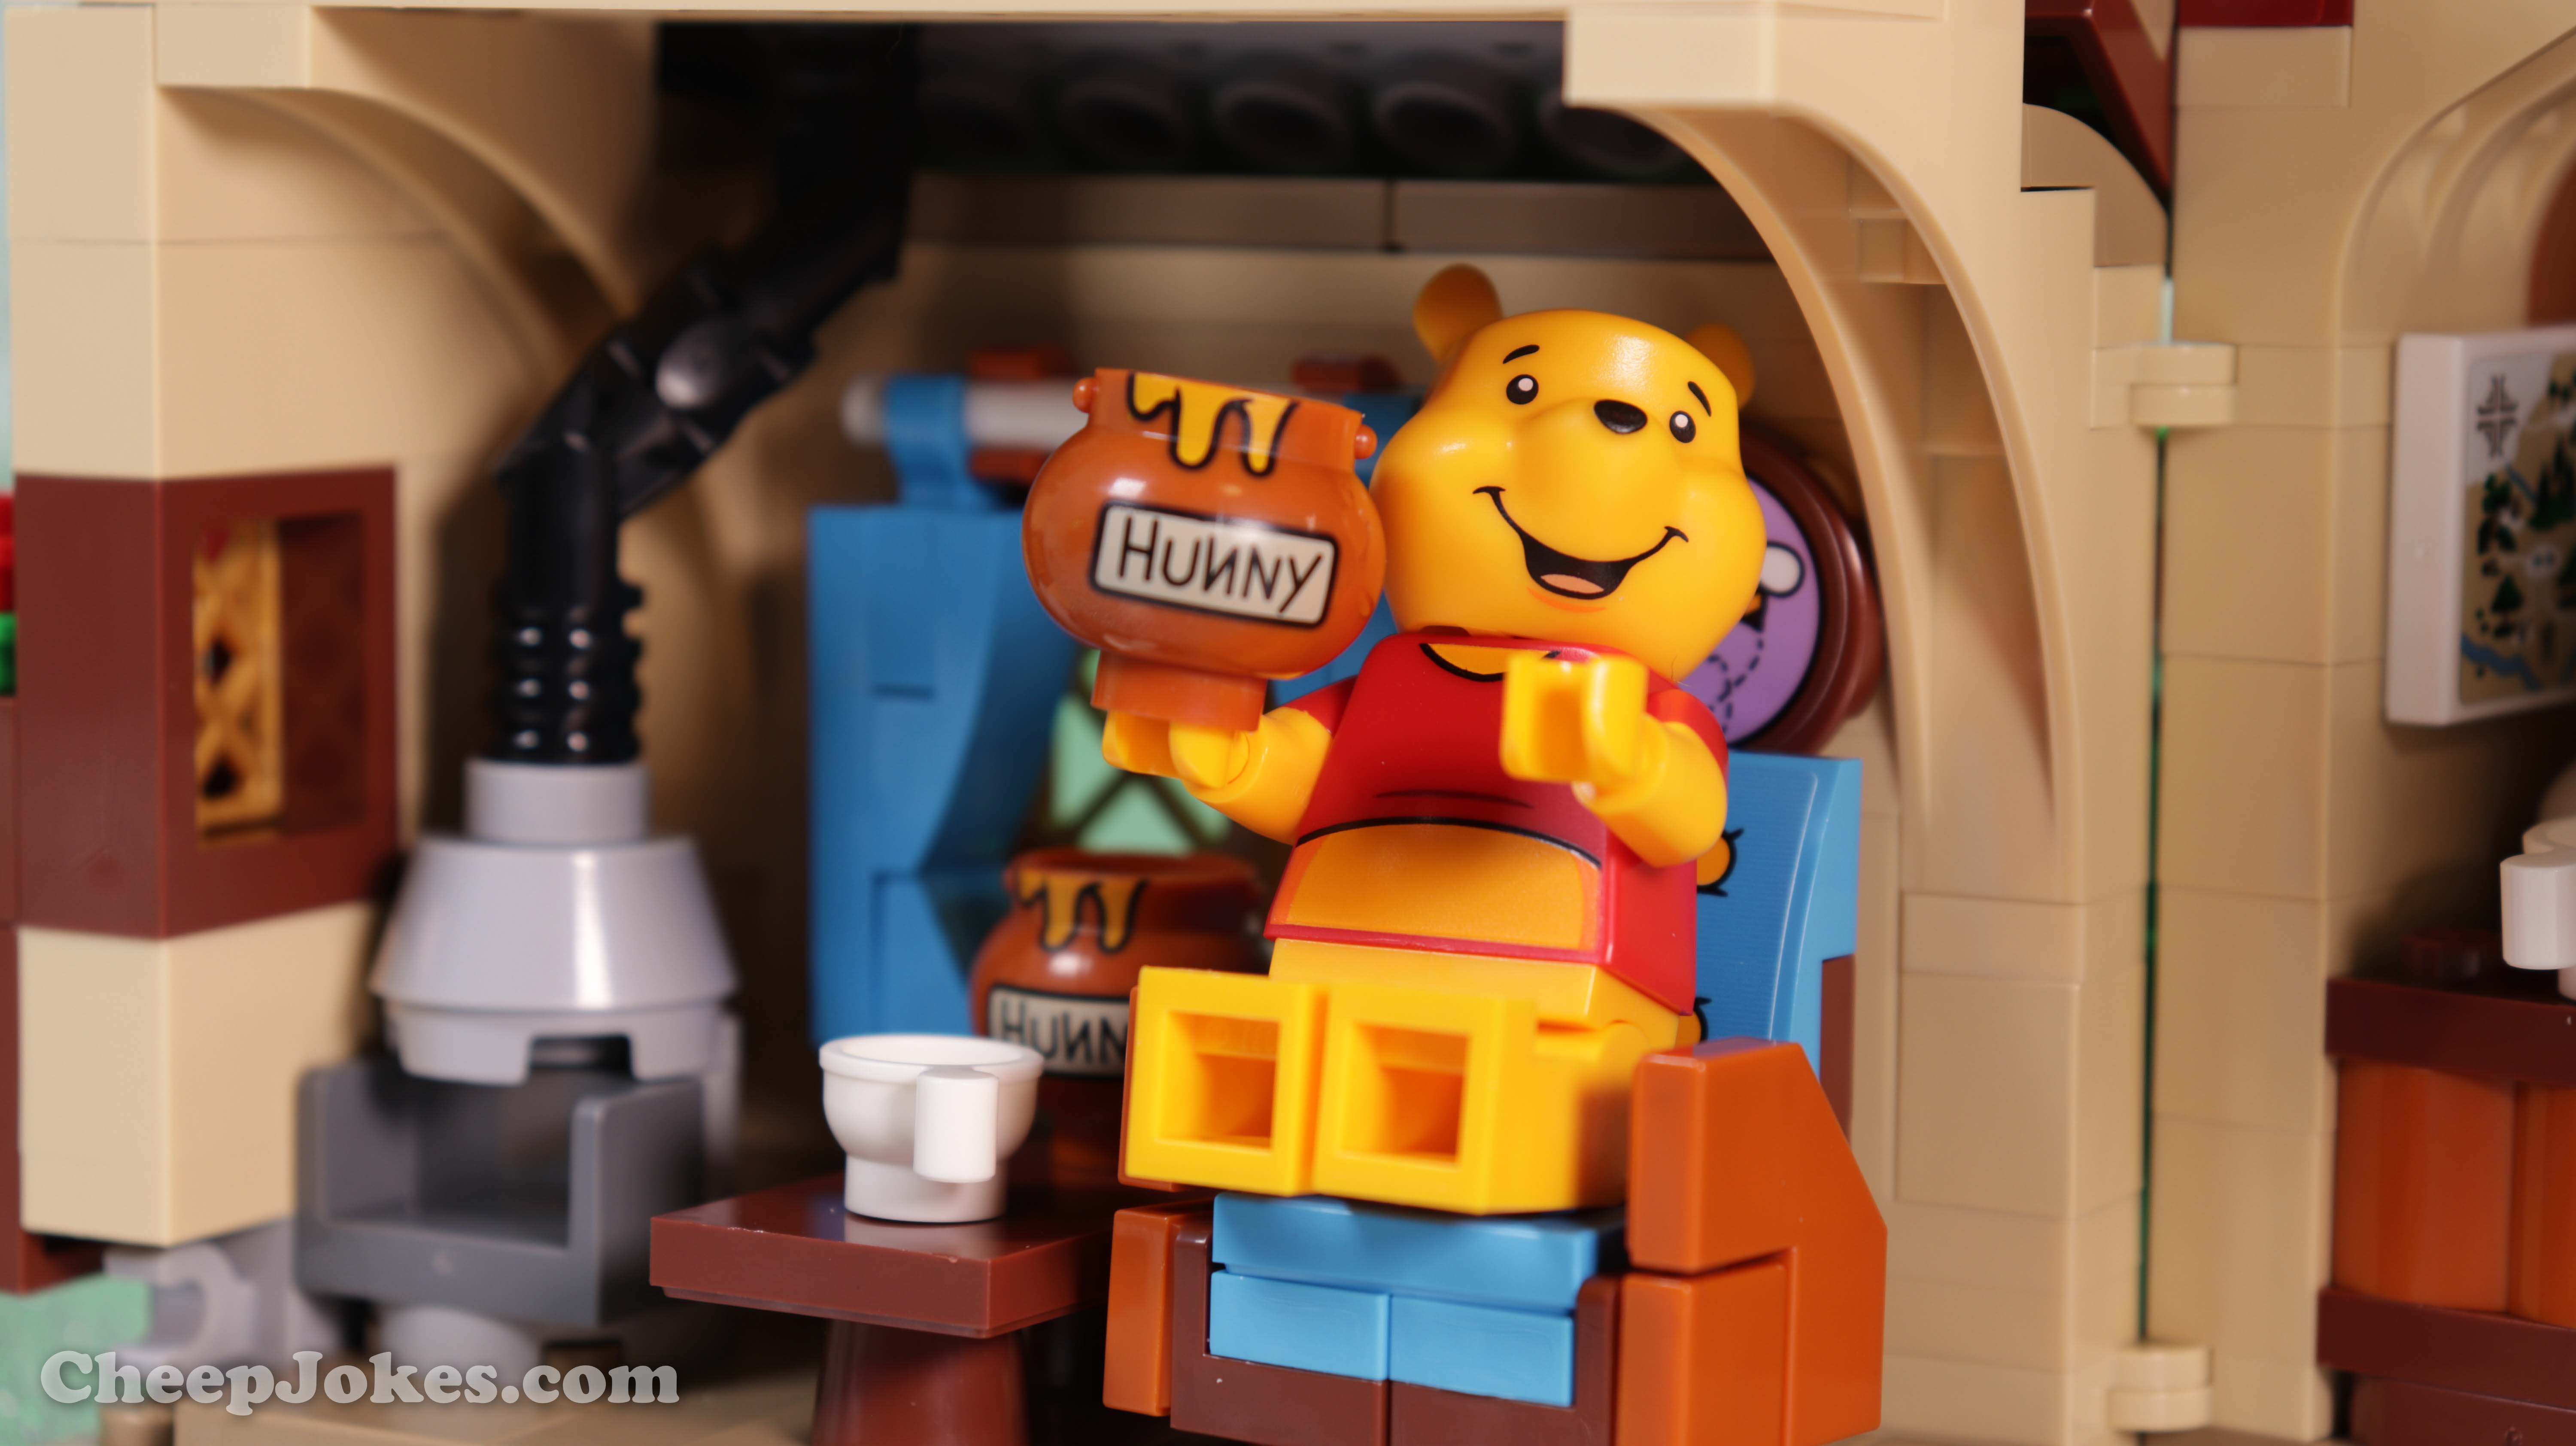 Take time out and rekindle joyful childhood memories with this LEGO® Ideas set (21326) featuring Disney’s Winnie the Pooh and a delightful LEGO brick recreation of Pooh Bear’s house under a big oak tree in Hundred Acre Wood. Great to build alone or with family, the house opens at the back for easy access to the authentic details inside, including Pooh’s buildable armchair, Pooh-Coo clock, Poohsticks, honey pot elements and much more. You can also create the effect of bees flying around beehives in the branches of the tree, like in the stories. Popular characters The model comes with Disney’s Winnie the Pooh, Piglet, Tigger and Rabbit minifigures, plus an Eeyore LEGO figure. The friends each have an accessory, including Winnie the Pooh’s buildable red balloon, to recreate classic scenes. Special gift Part of a collection of premium-quality LEGO building kits for adults, this set makes a charming gift for yourself, a Disney Winnie the Pooh enthusiast, LEGO fan or any hobbyist.